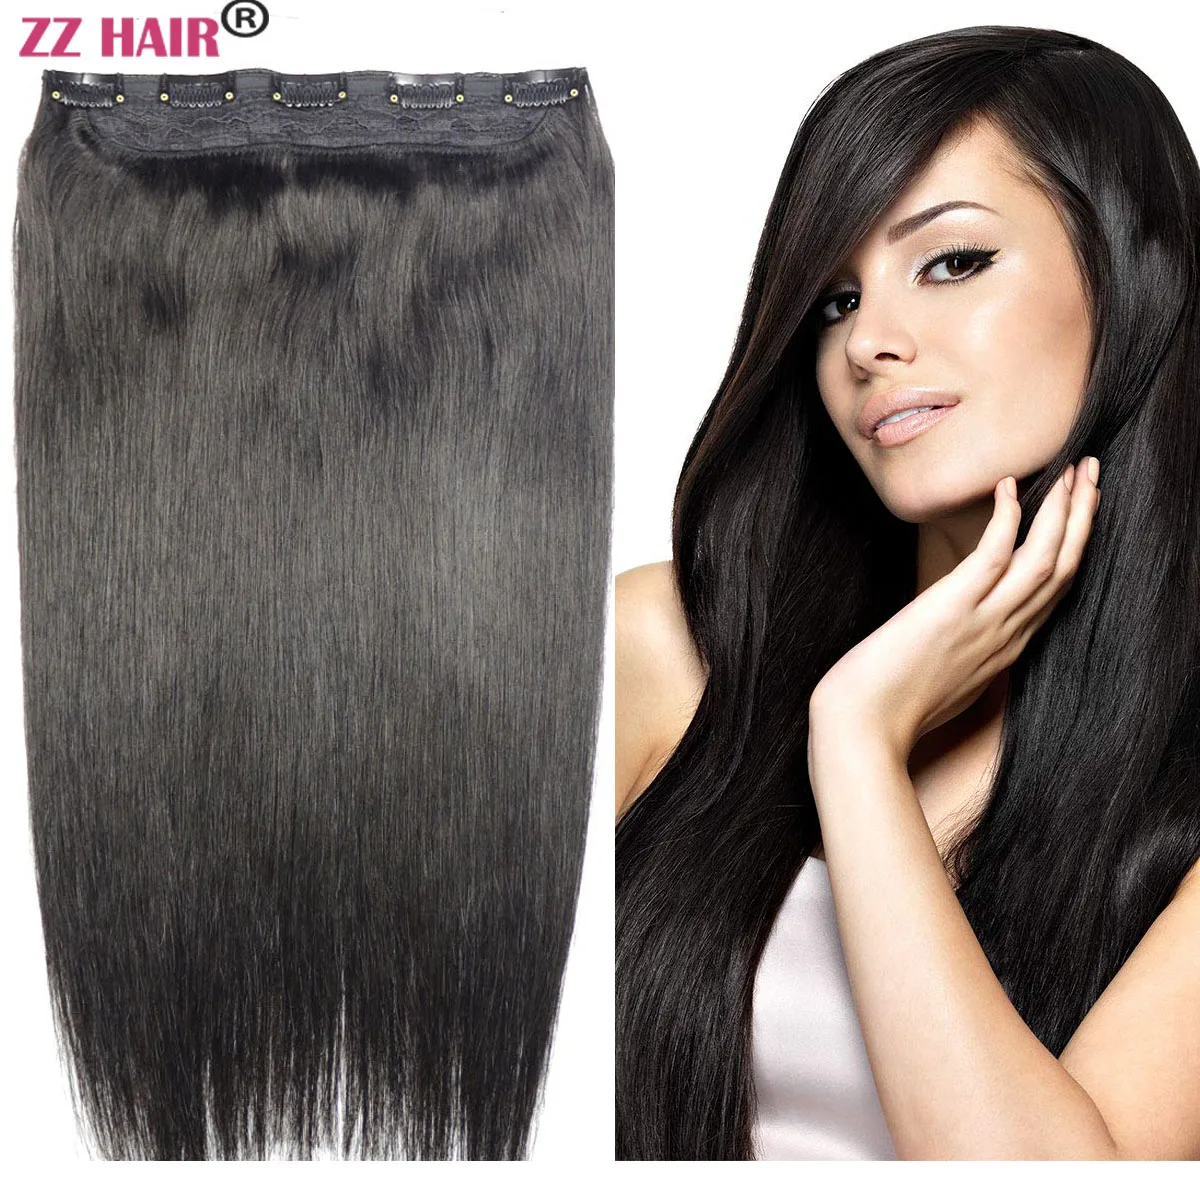 

ZZHAIR 100% Brazilain Human Remy Hair Extensions 16" 18" 20" 5 Clips in 1pcs Set 70g-100g One Piece Natural Straight